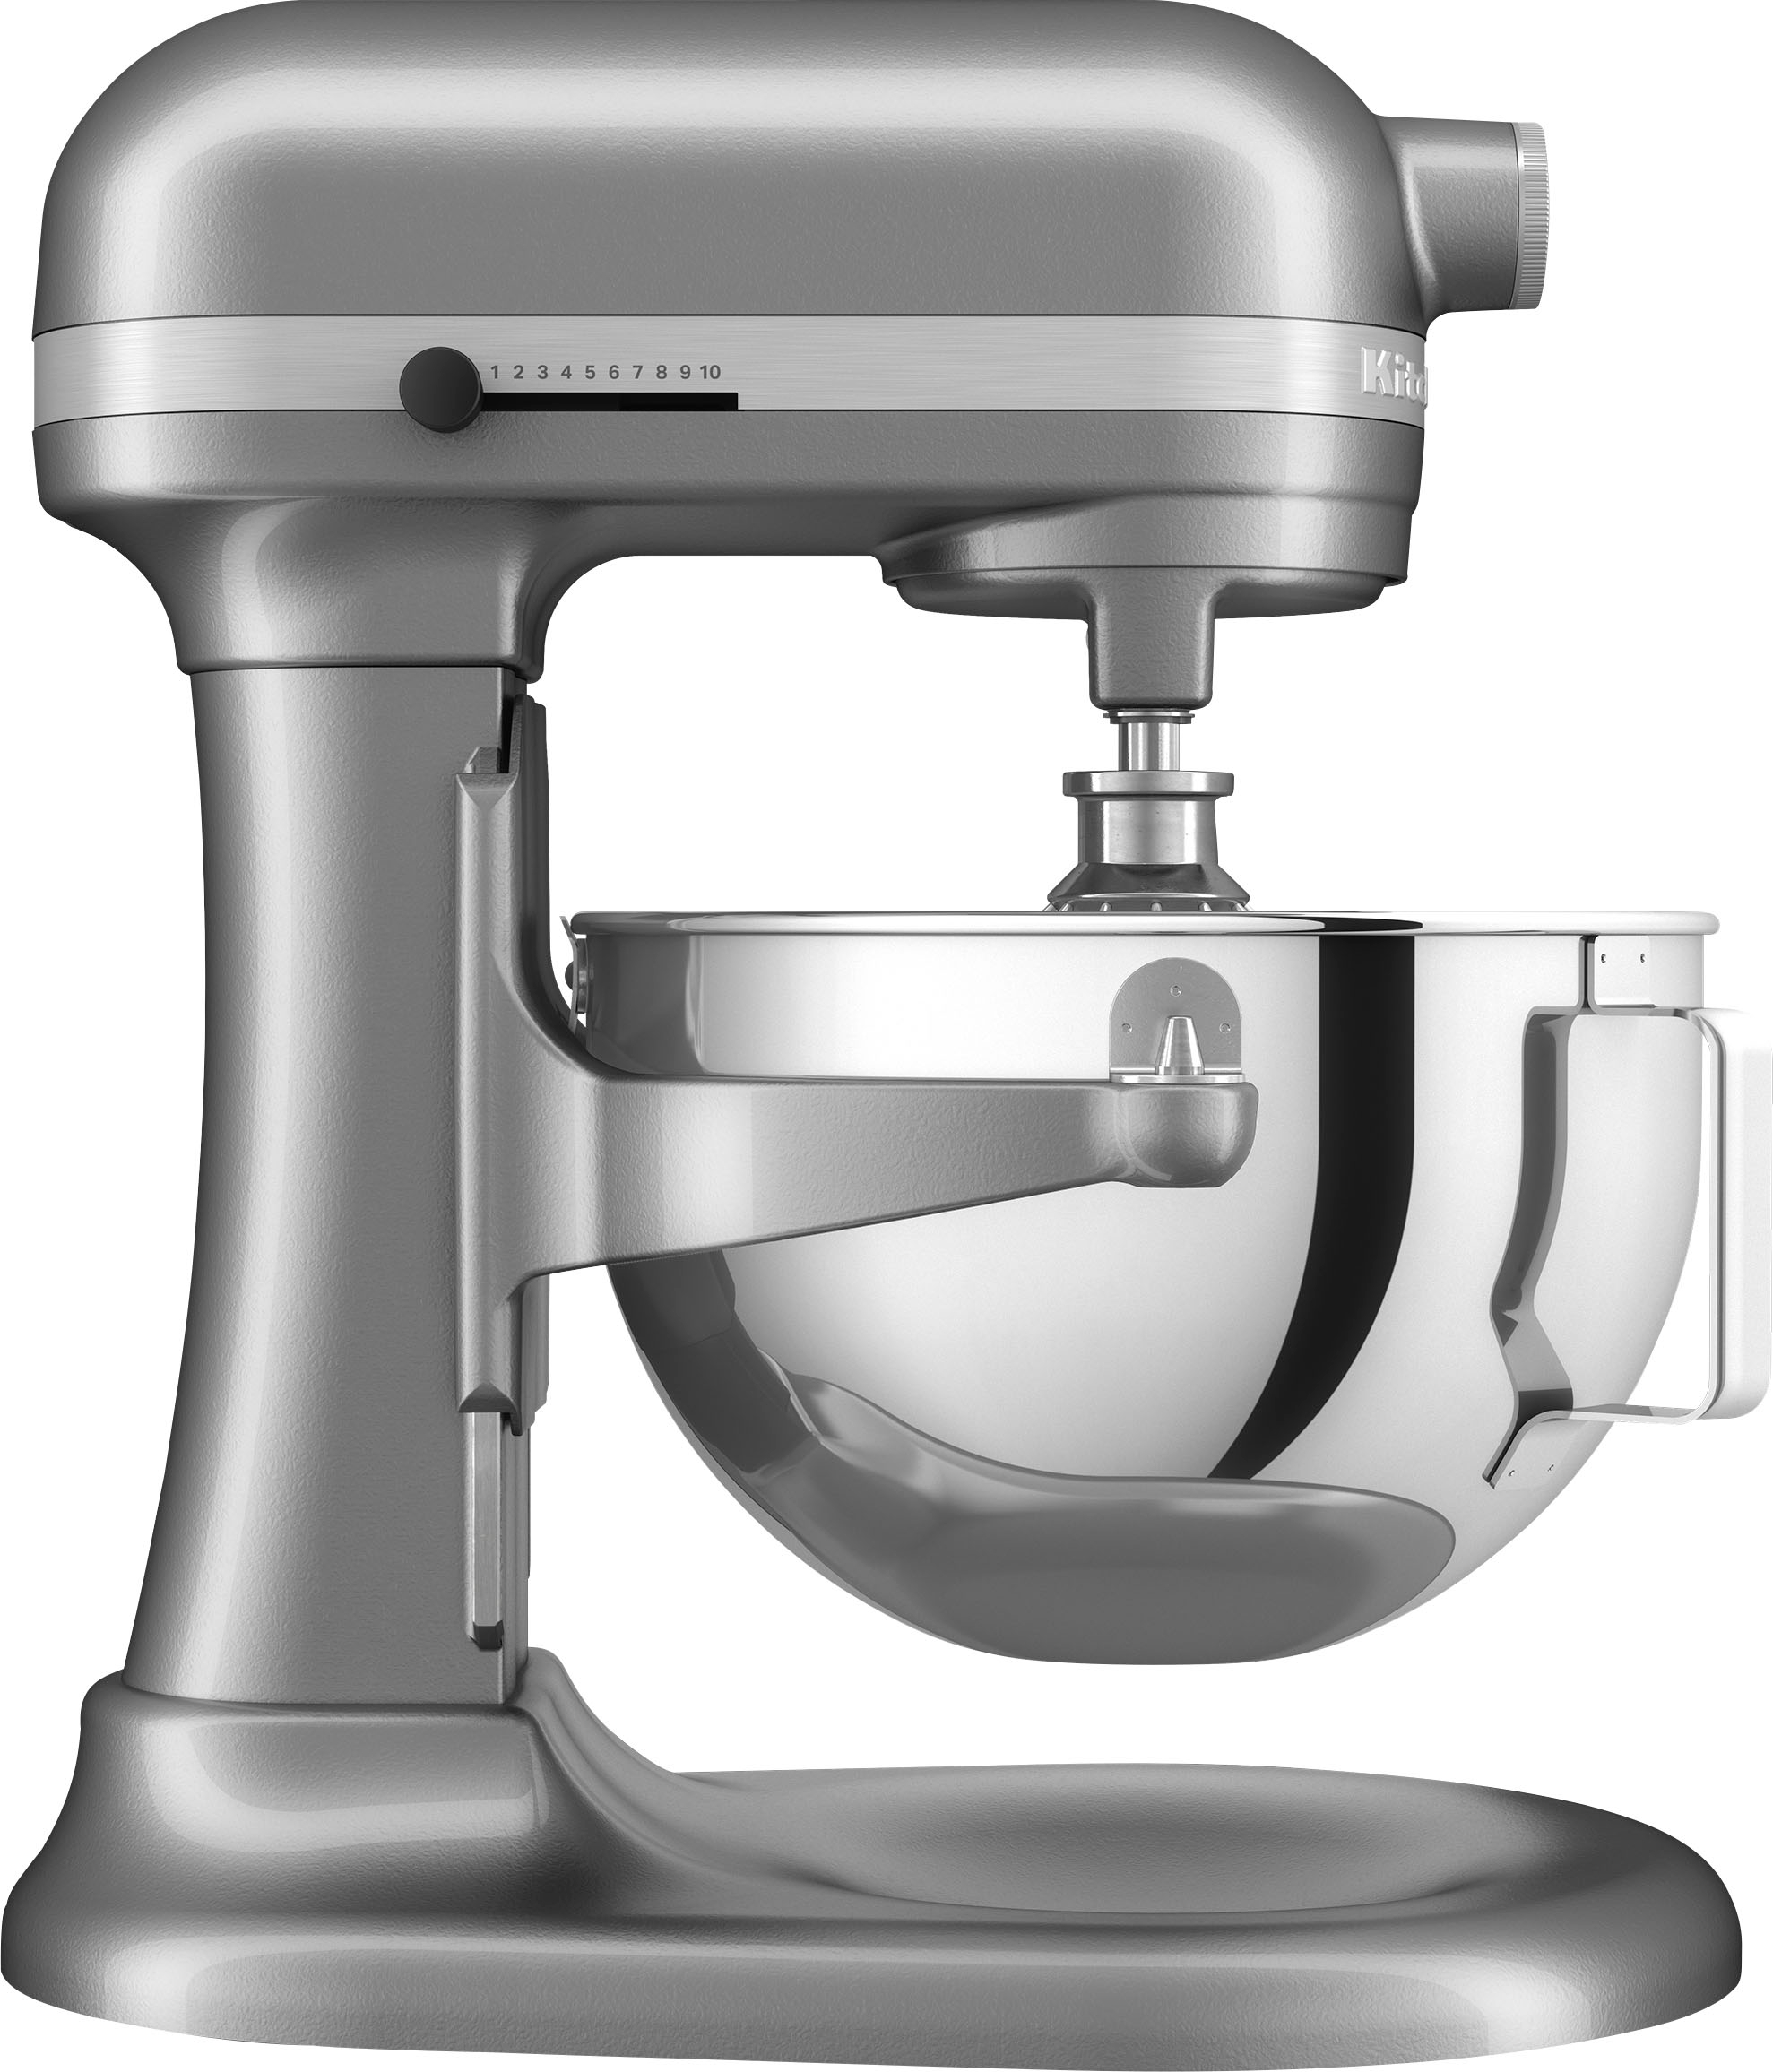 Rockford Liquidation Warehouse - Brand new KitchenAid Professional 5 Plus 5  Quart Bowl-Lift Stand Mixer Model KP25M0XER Retails for $340 selling for  $195 cash or credit plus sales tax 6638 11th St., Rockford, IL 61109